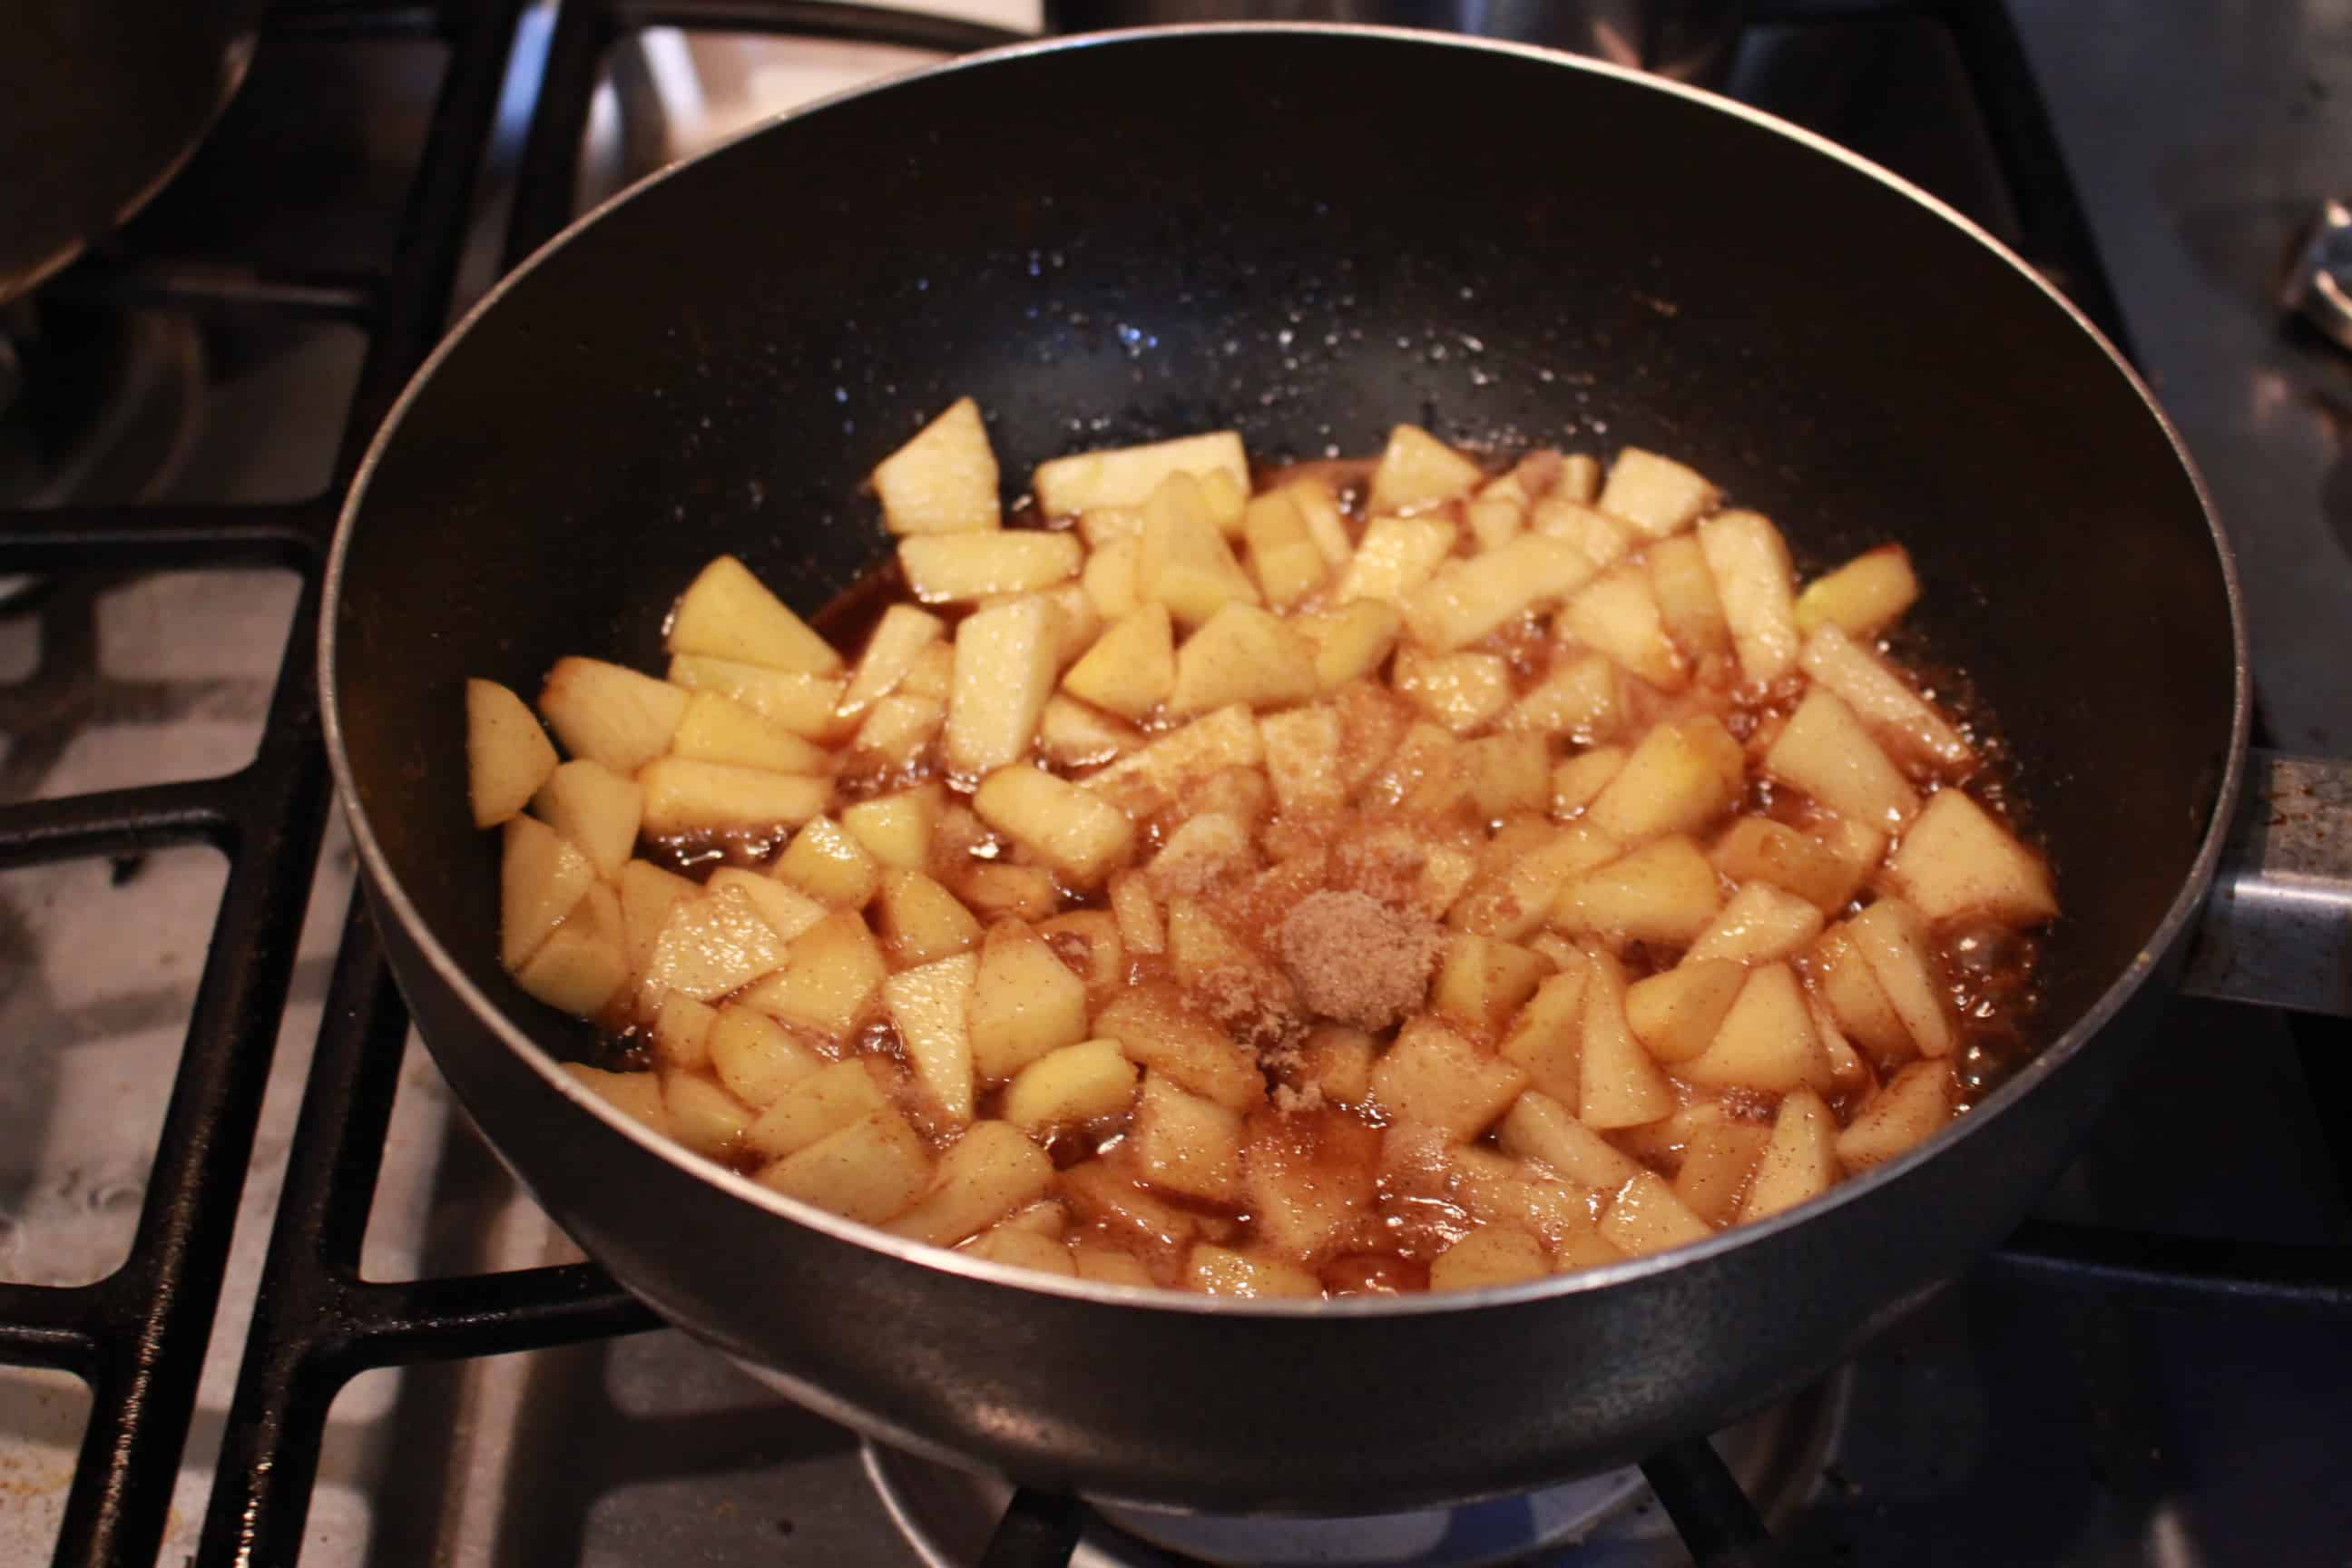 Apples cooking in a pan